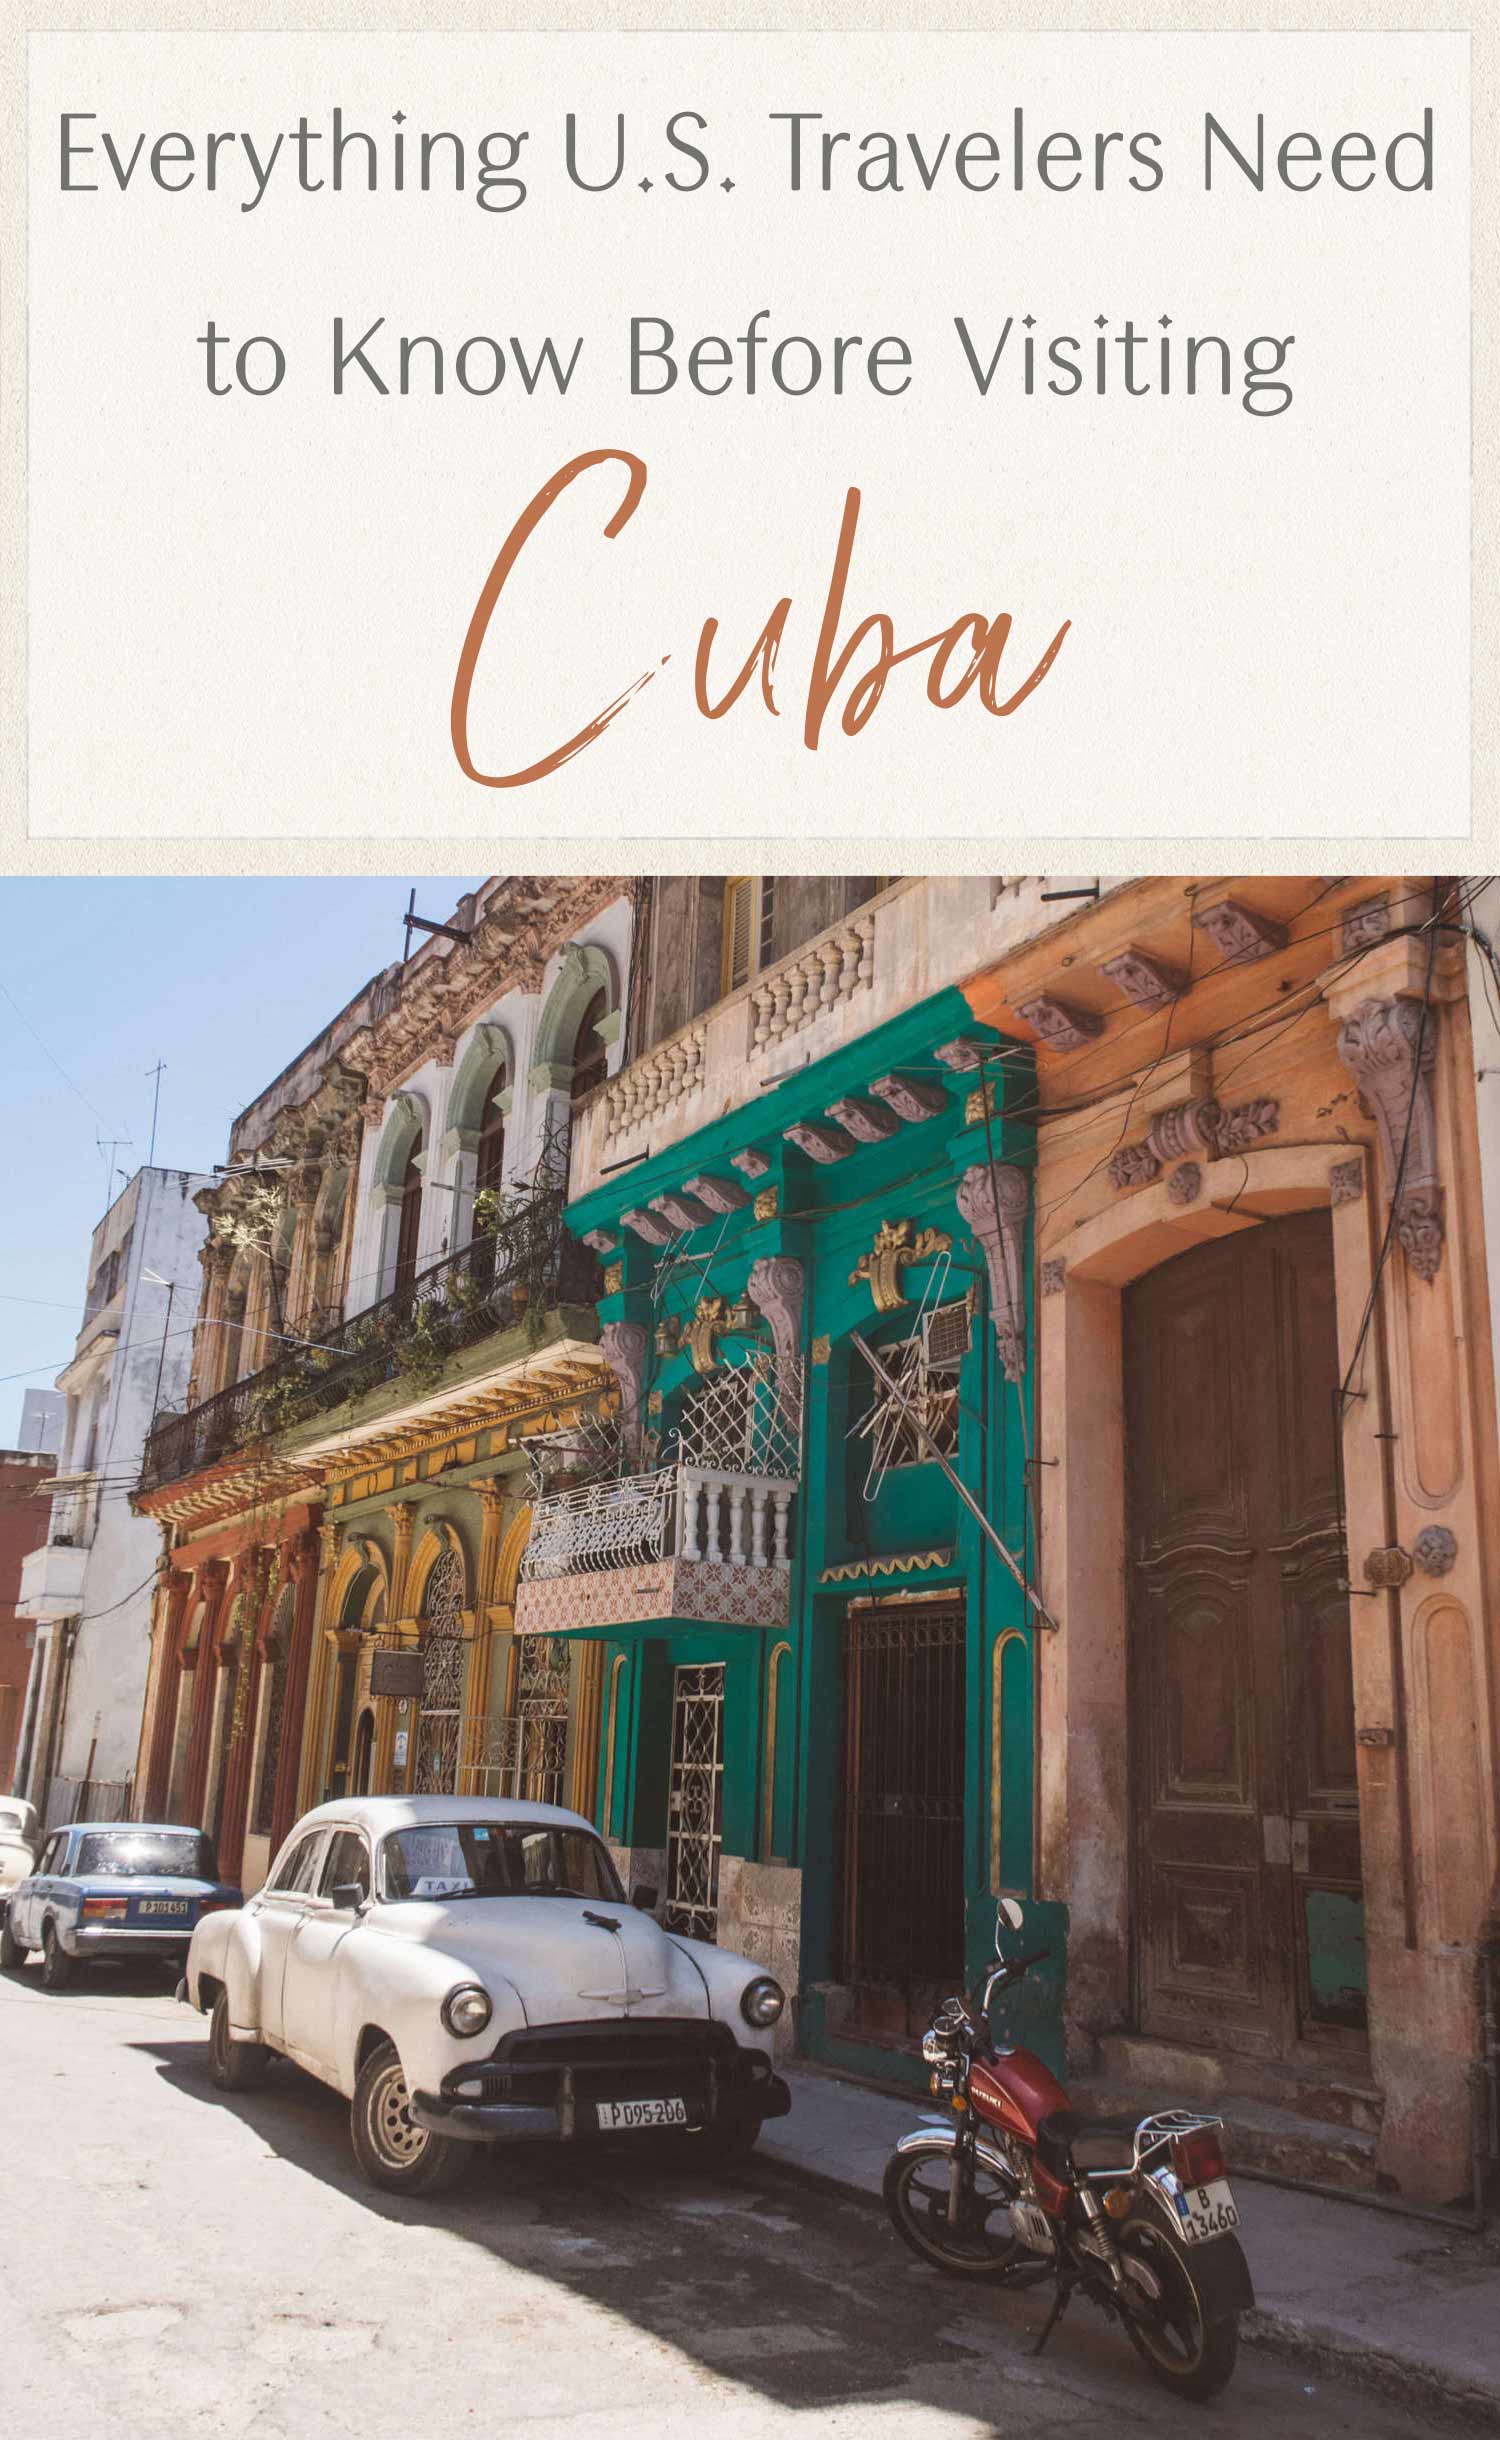 Everything U.S. Travelers Need to Know Before Visiting Cuba